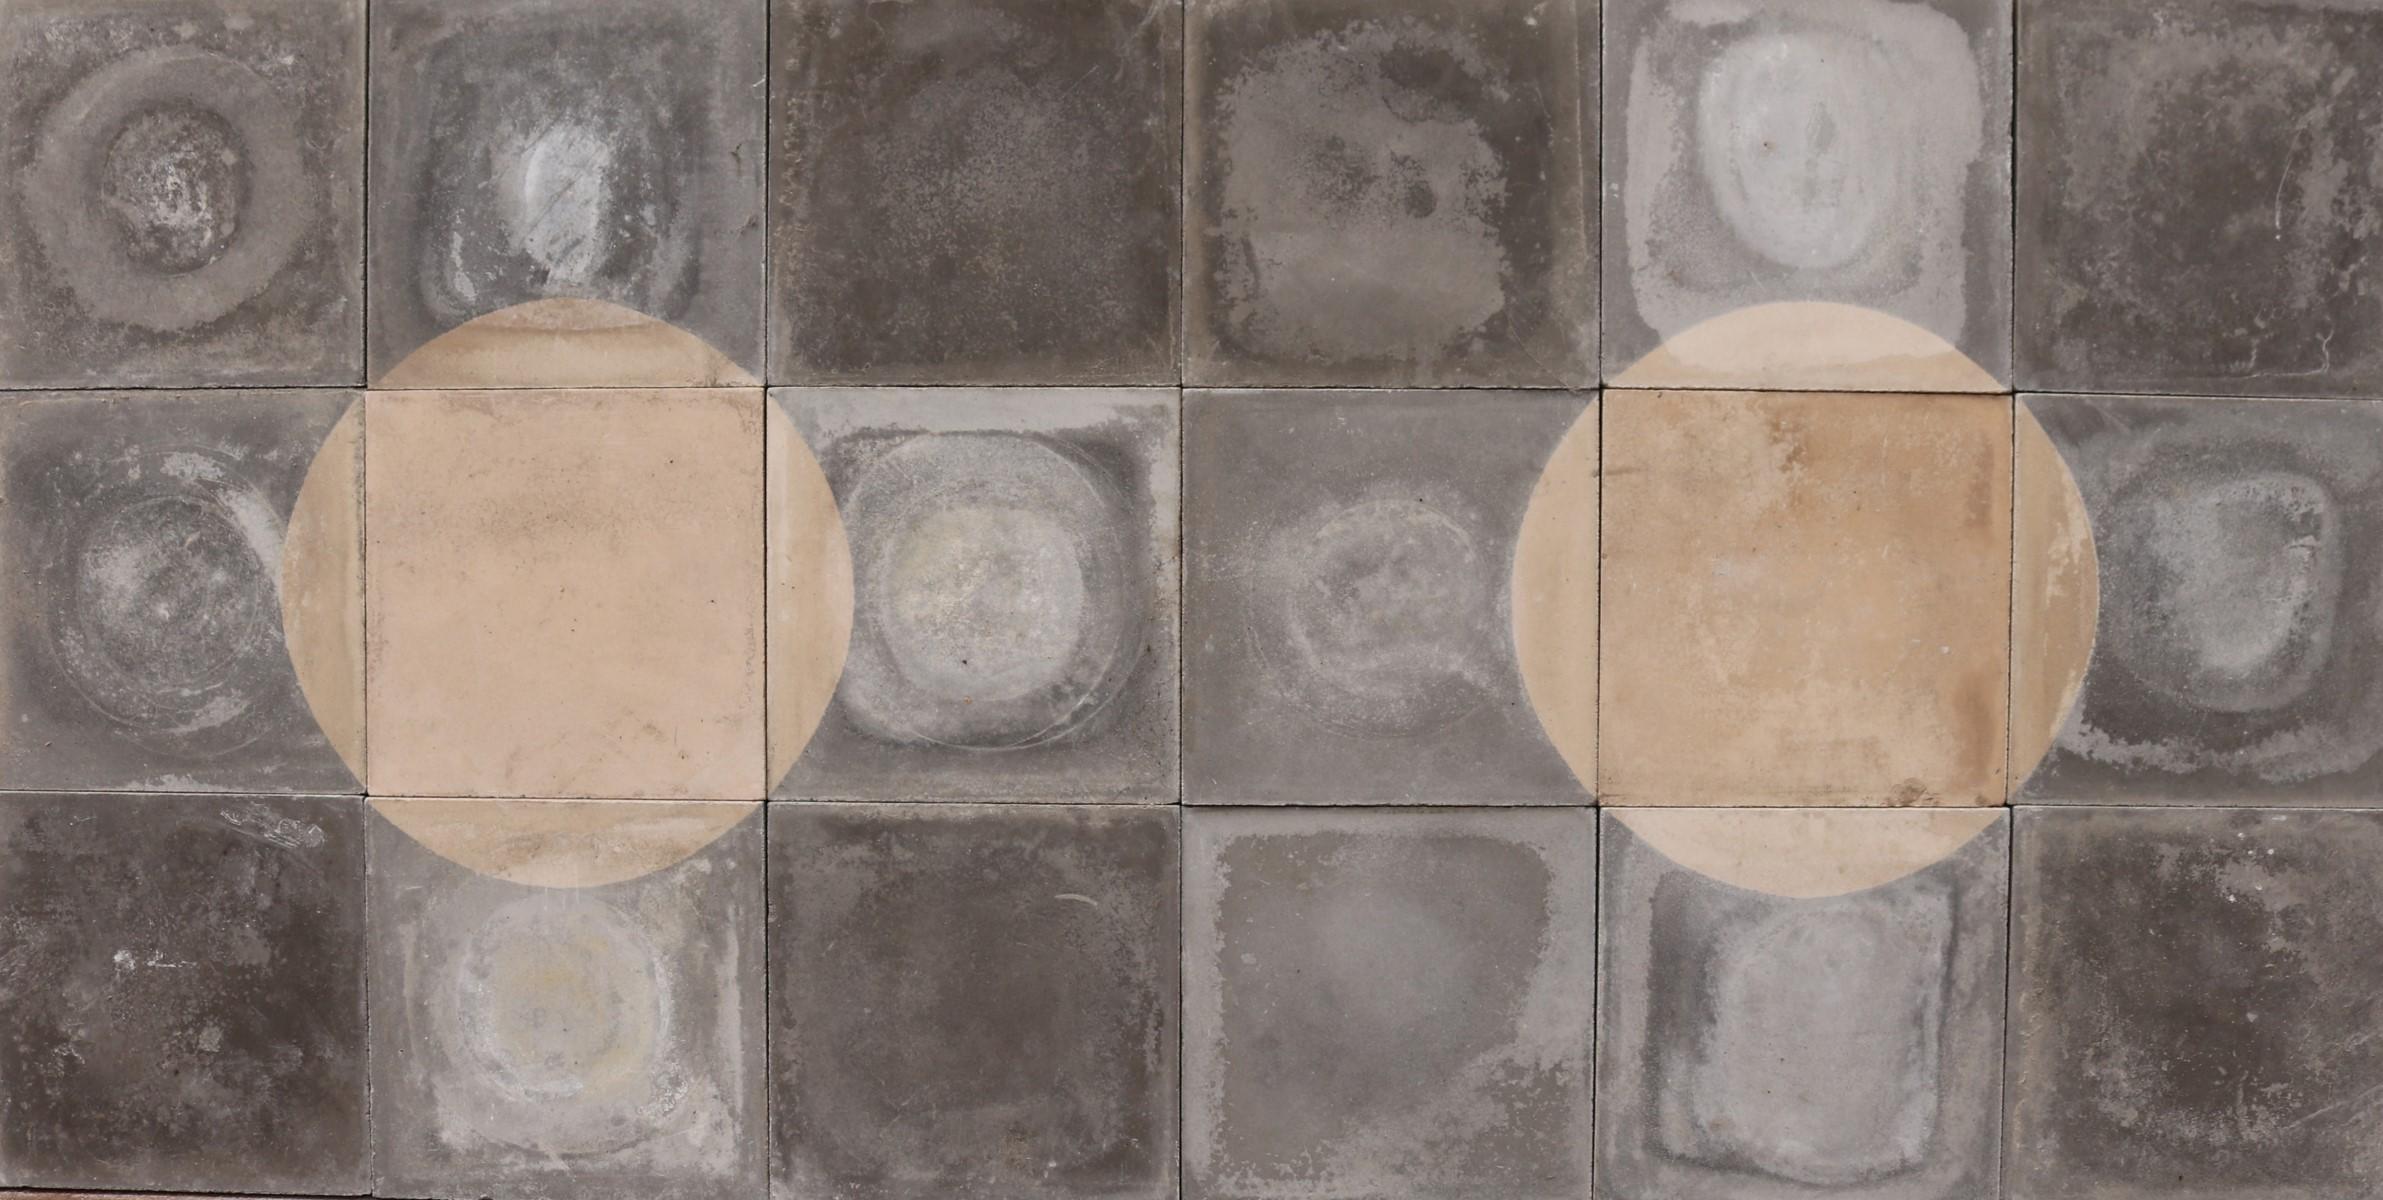 A batch of 147 reclaimed encaustic cement tiles with a black and white circle pattern. These tiles will cover 5.8 m2 or 62 ft2. Suitable for wall or floors.

There are 8 sets in total, two pictured.

Weathered surfaces and small chips associated